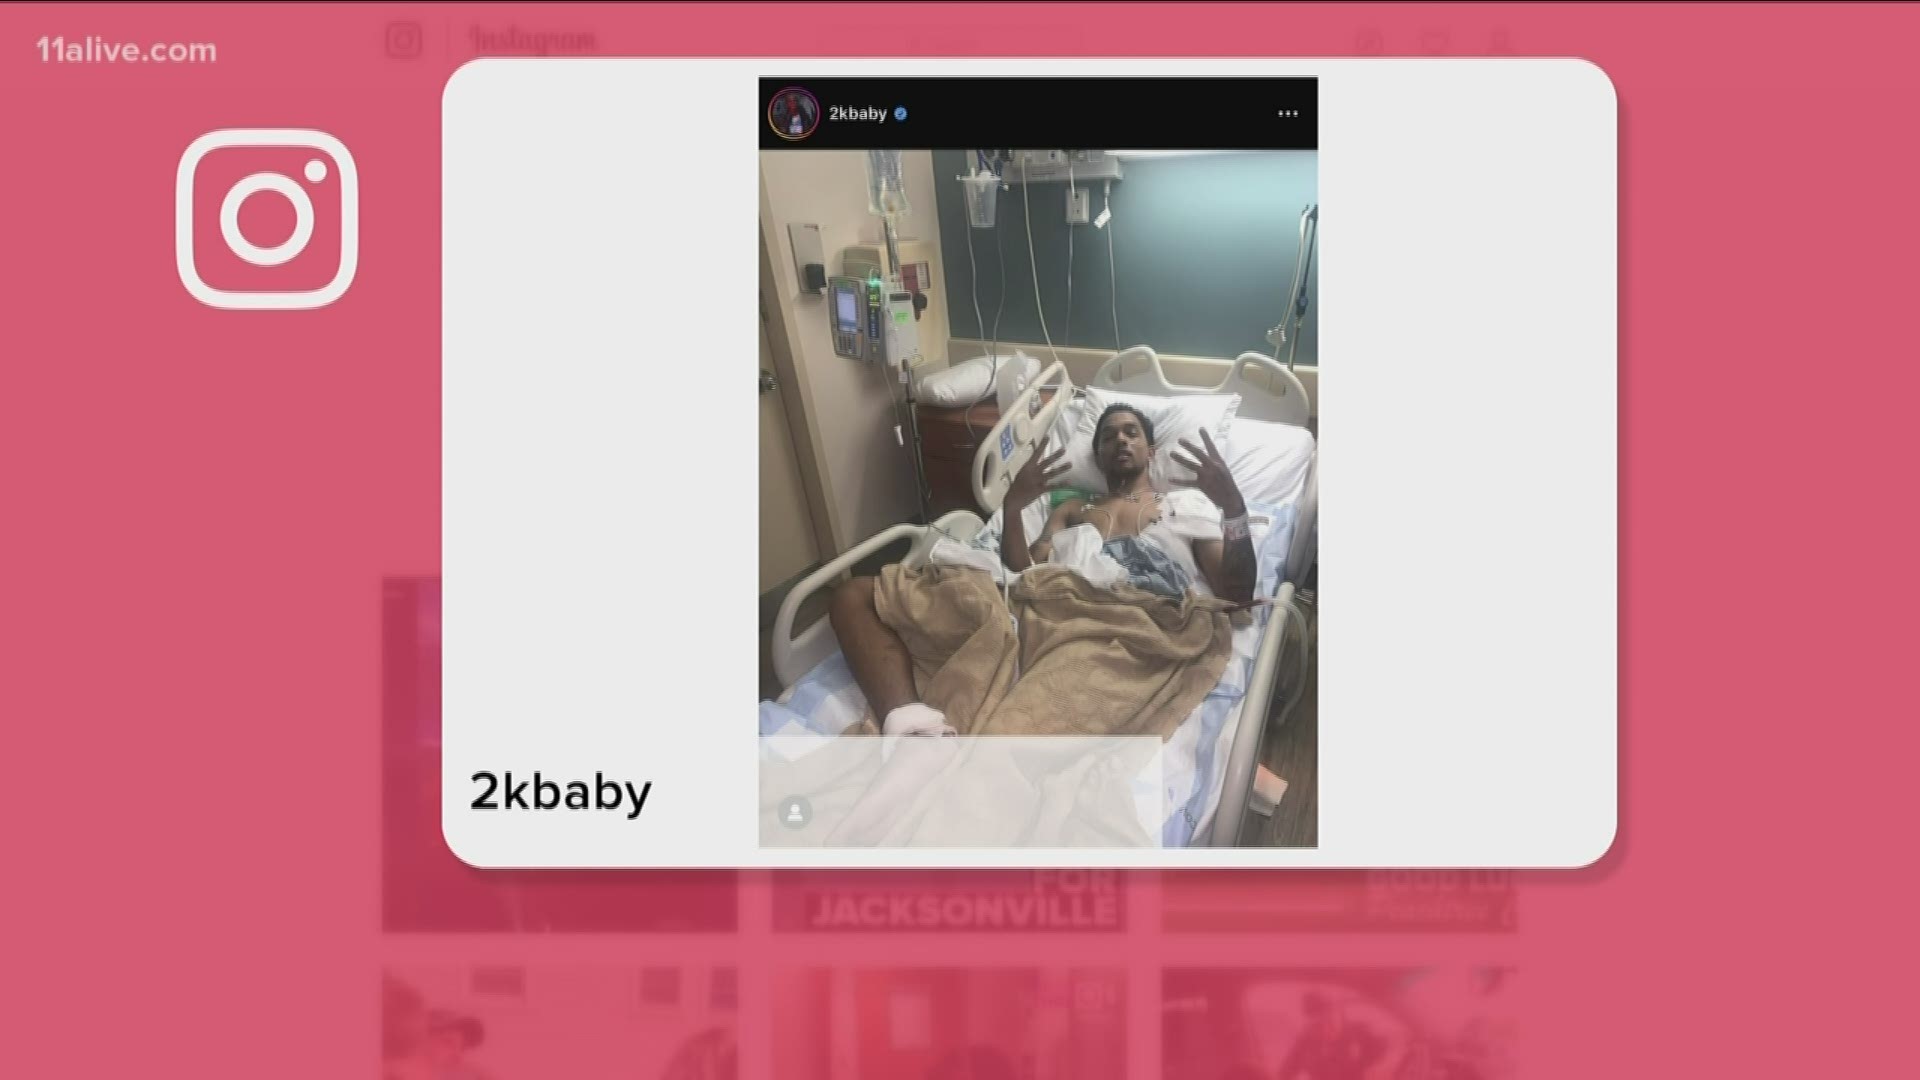 2KBABY's manager issued a statement on his behalf and released a photo of his friend recovering in a local hospital.